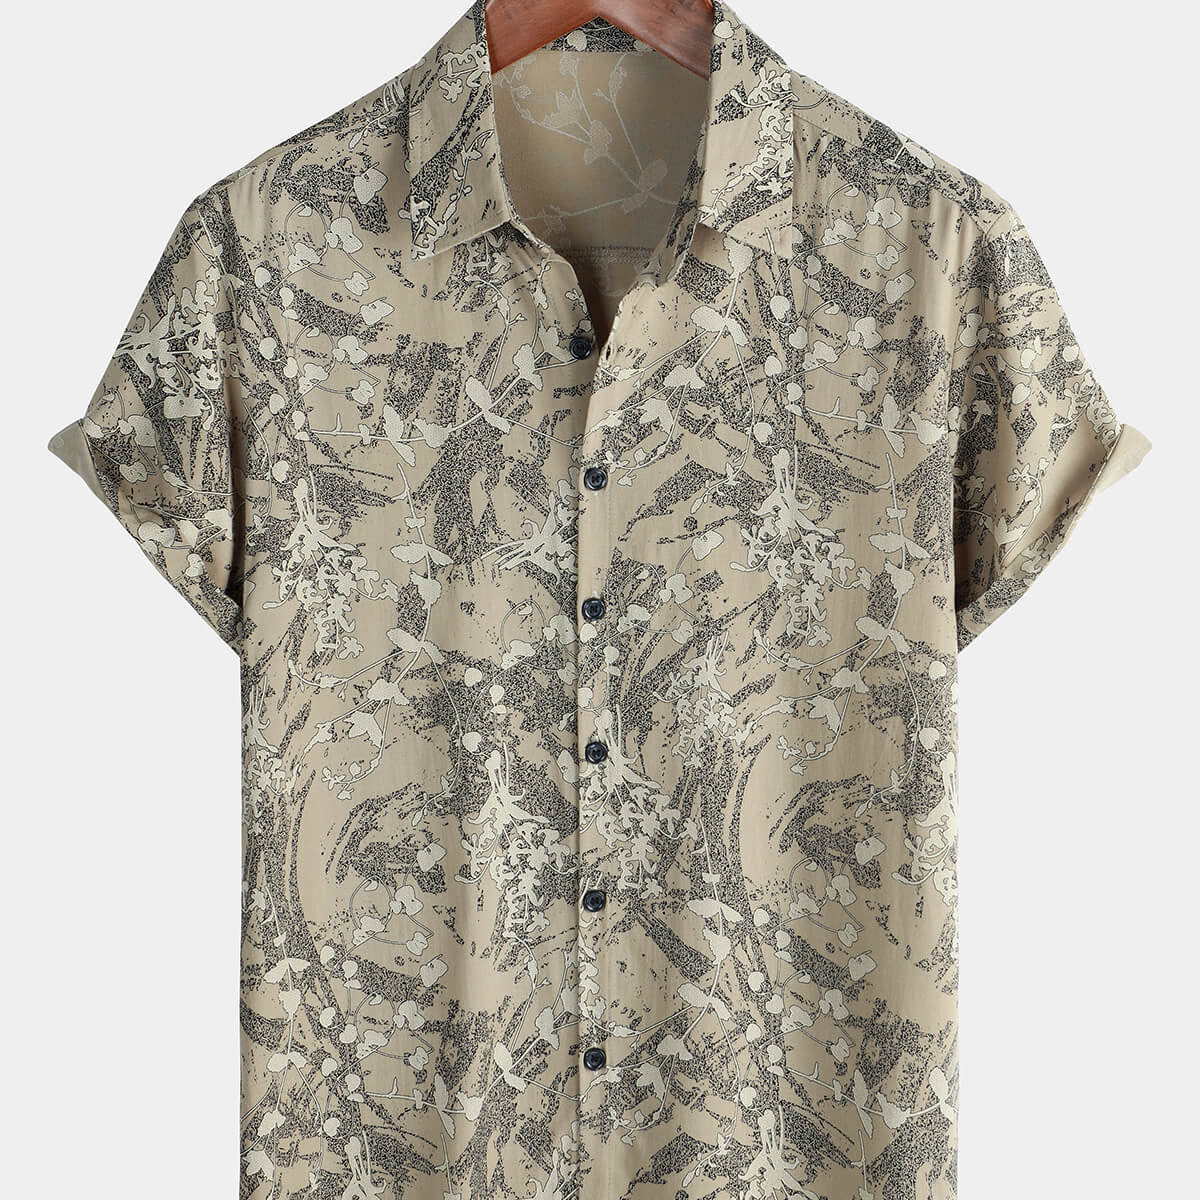 Men's Summer Holiday Soft Retro Rayon Floral Button Up Short Sleeve Shirt